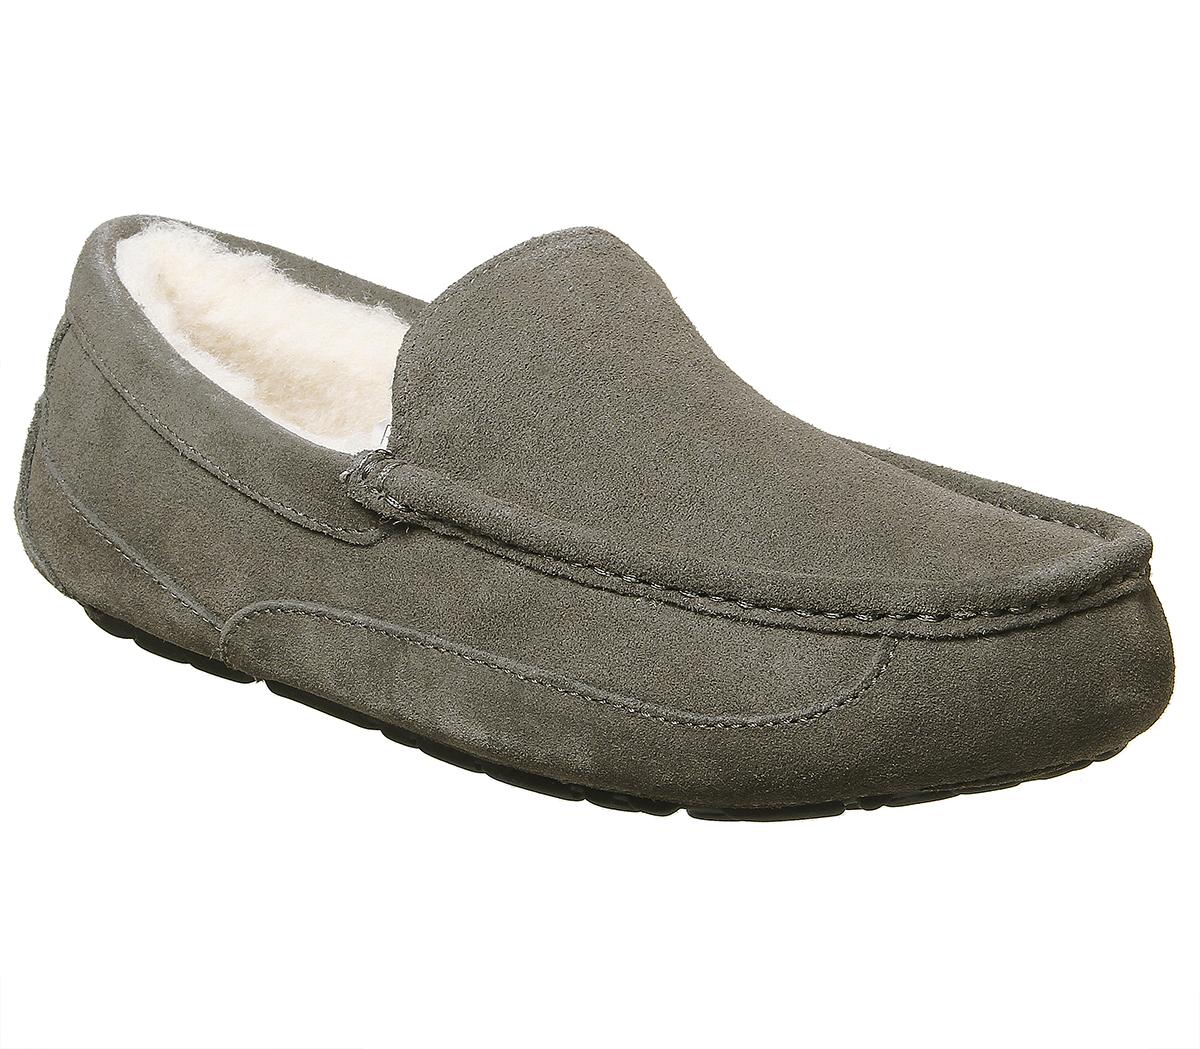 mens ugg ascot slippers on sale